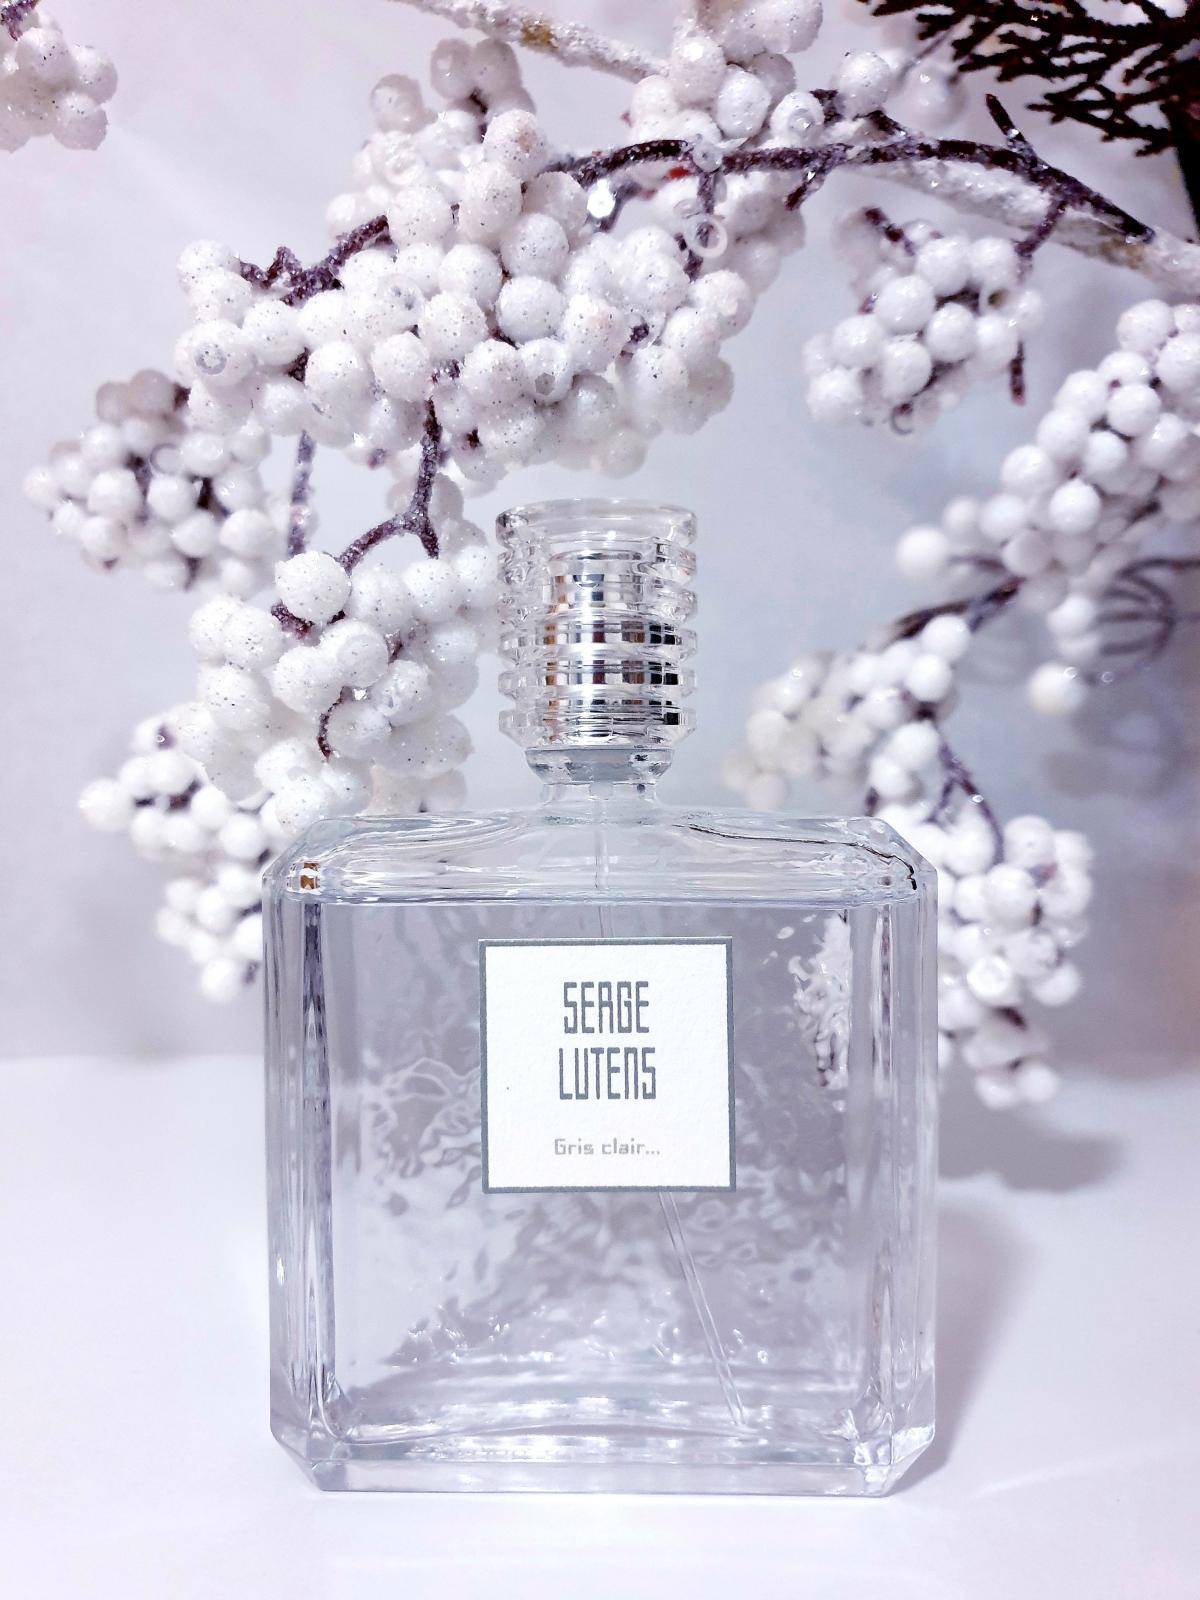 Gris Clair Serge Lutens perfume - a fragrance for women and men 2019